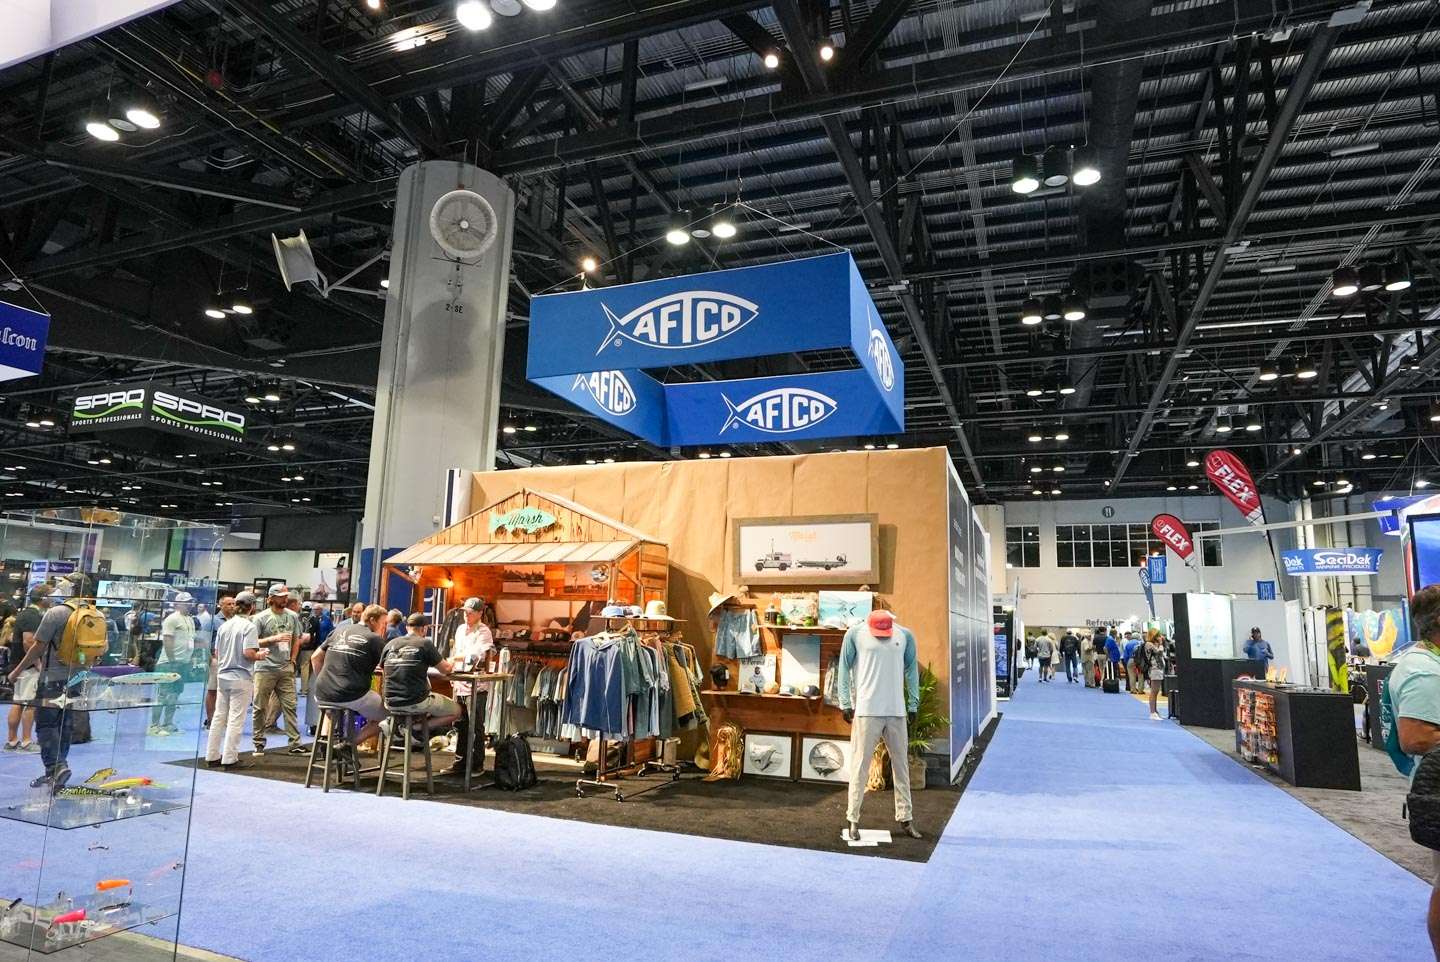 With so many pros coming and going, it's hard to catch them all, but here are a few of the Elites that were hanging out on Day 2 of ICAST. 